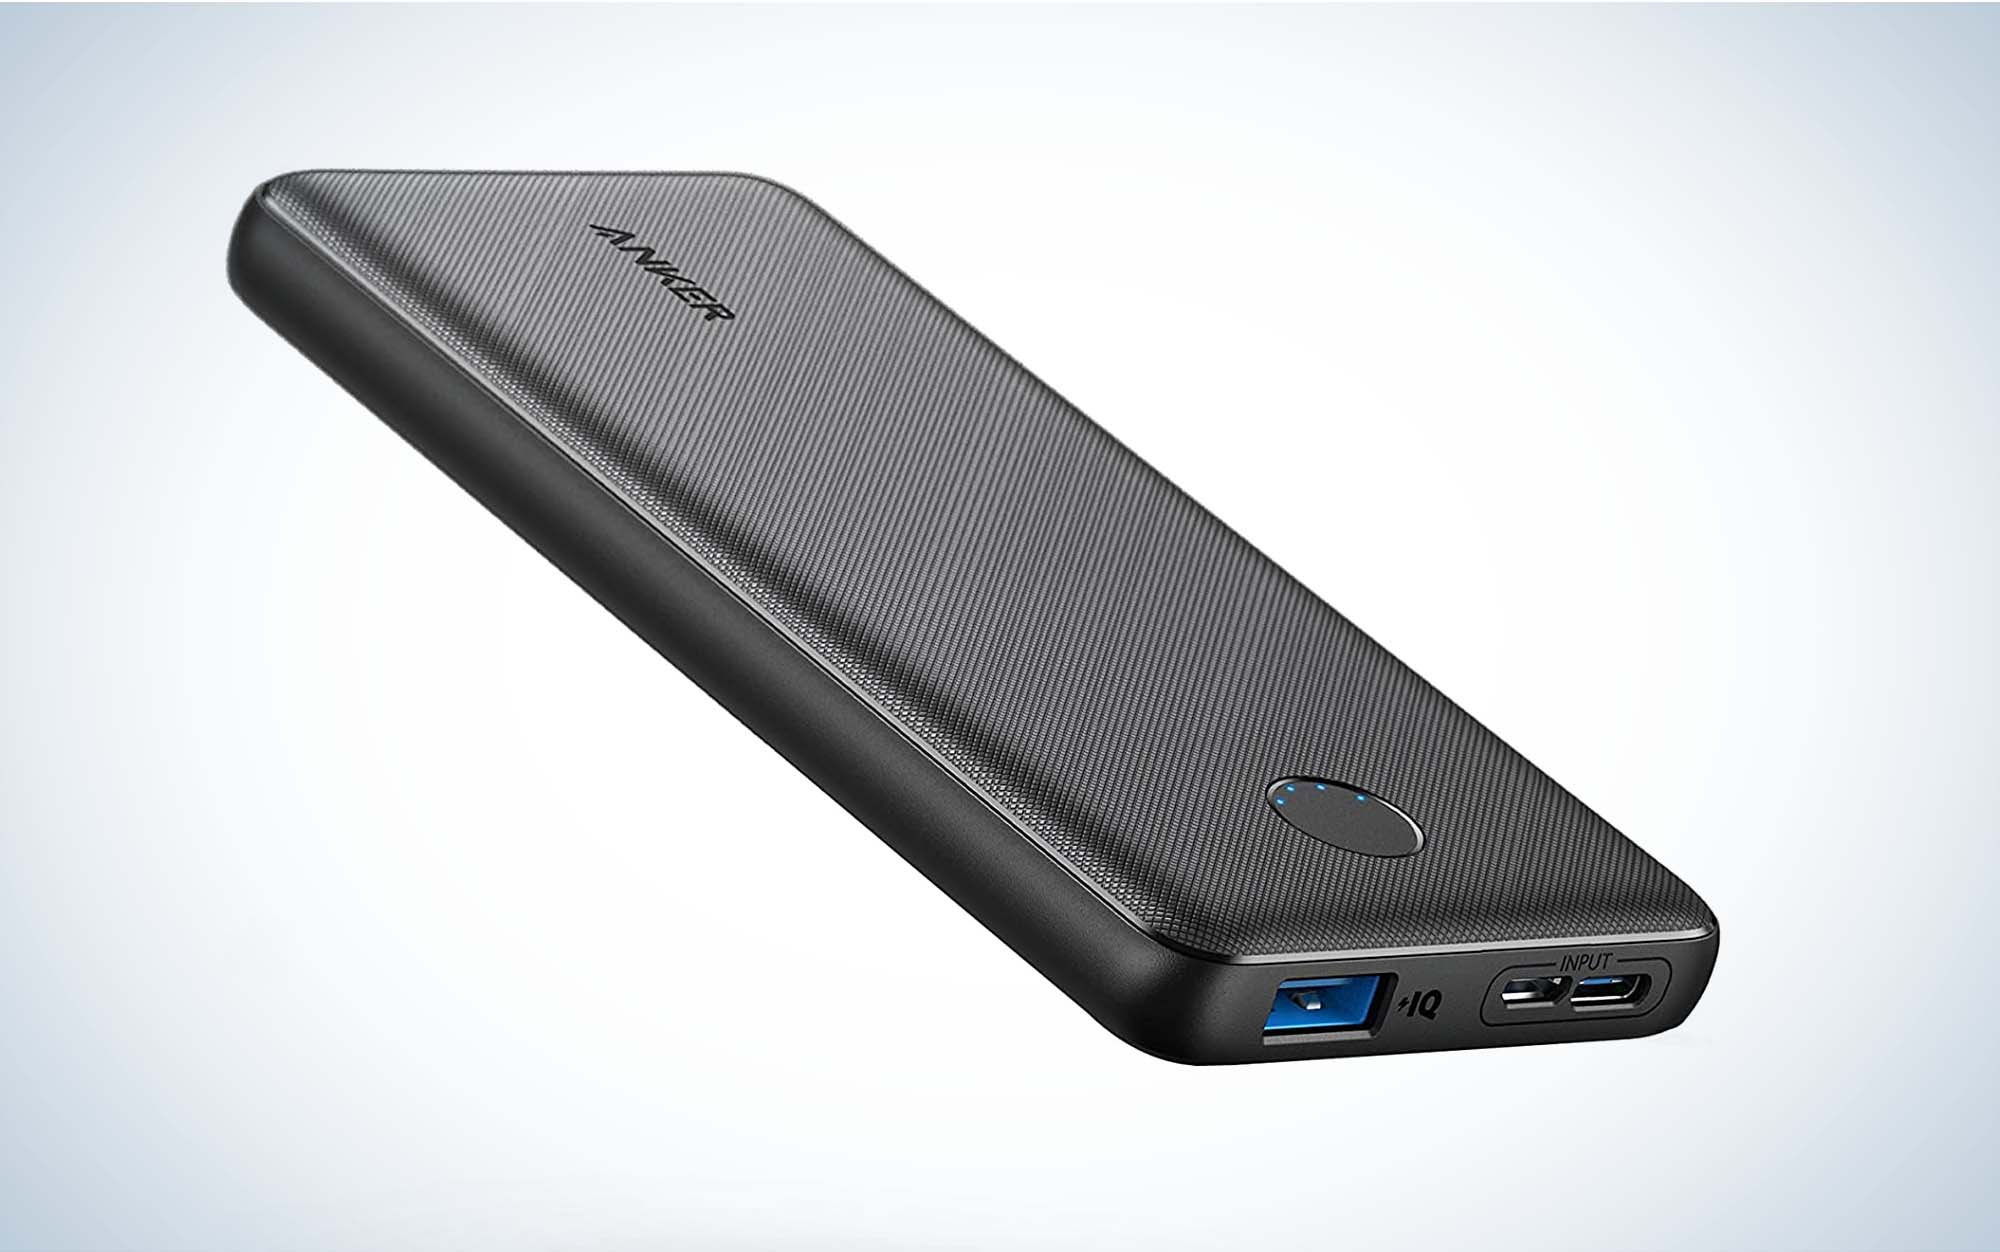 anker power bank is the best gifts for hunters under $25